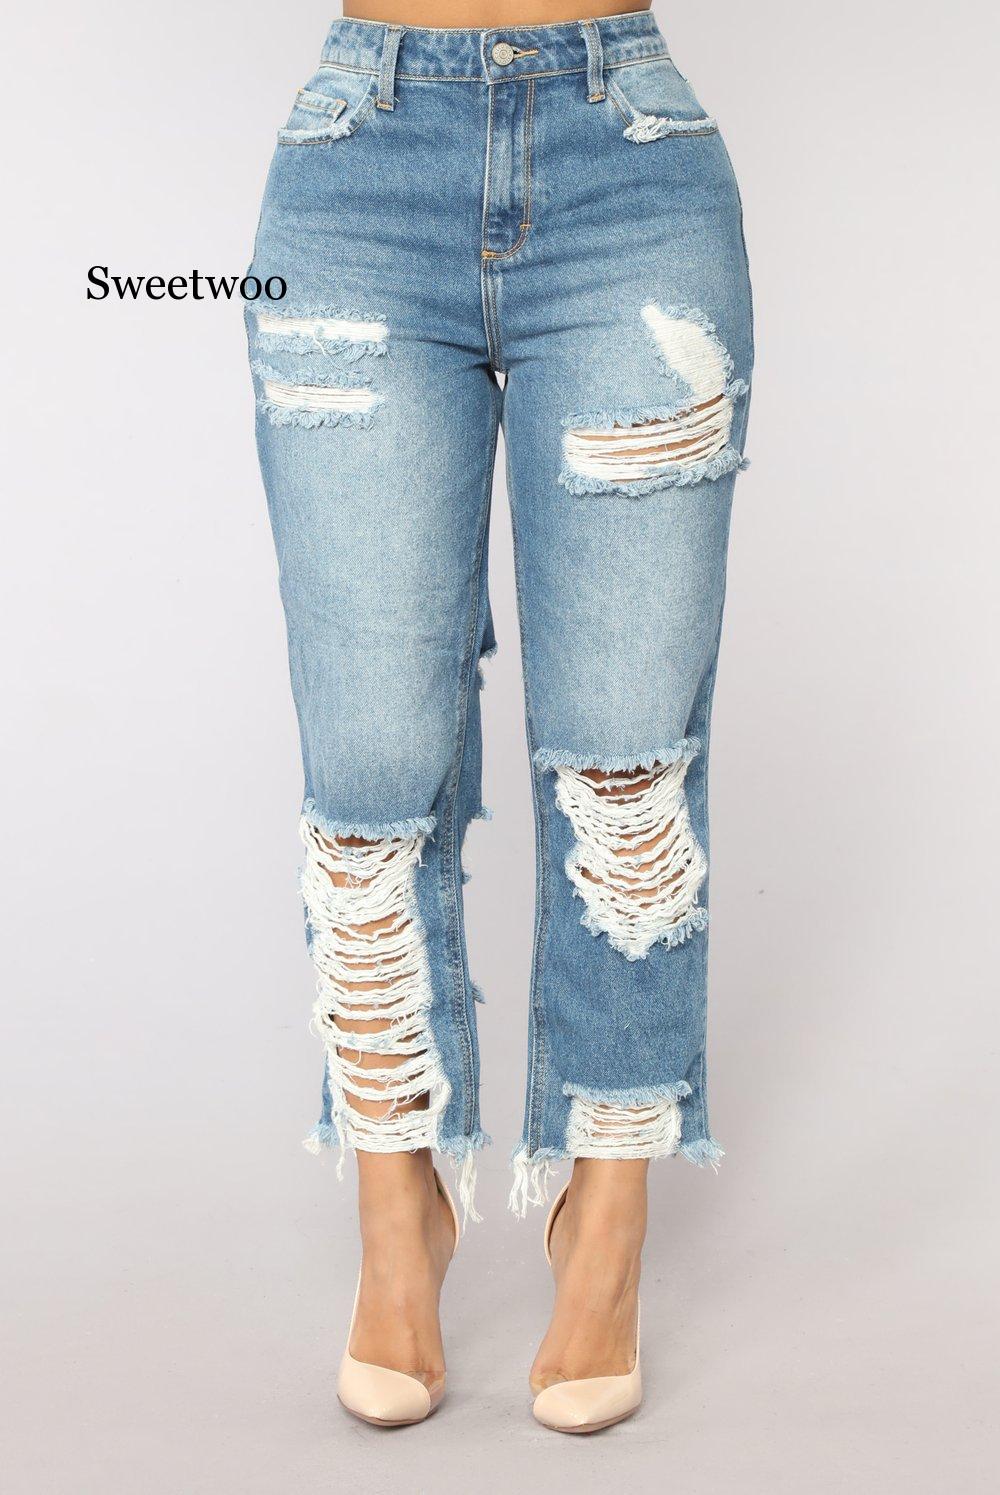 Sexy Back Hole Distressed Ripped Boyfriend Jeans For Women High Waisted Destroyed Jeans Street Rock Cut Out Loose Straight Jean 4